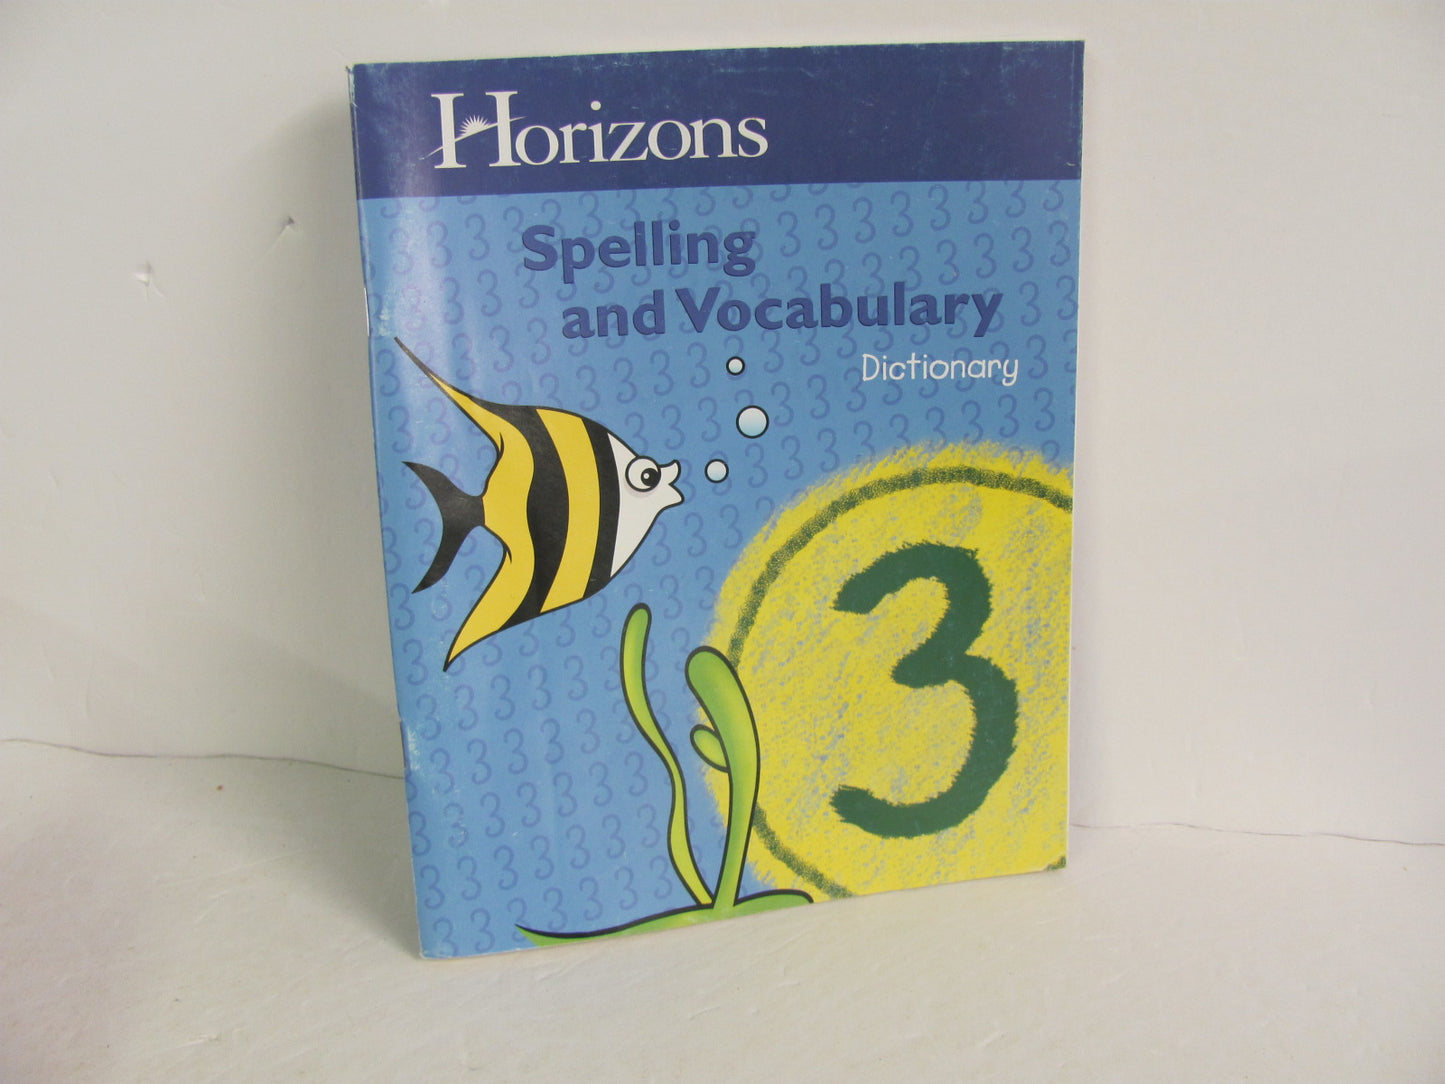 Spelling and Vocab Horizons Pre-Owned 3rd Grade Spelling/Vocabulary Books